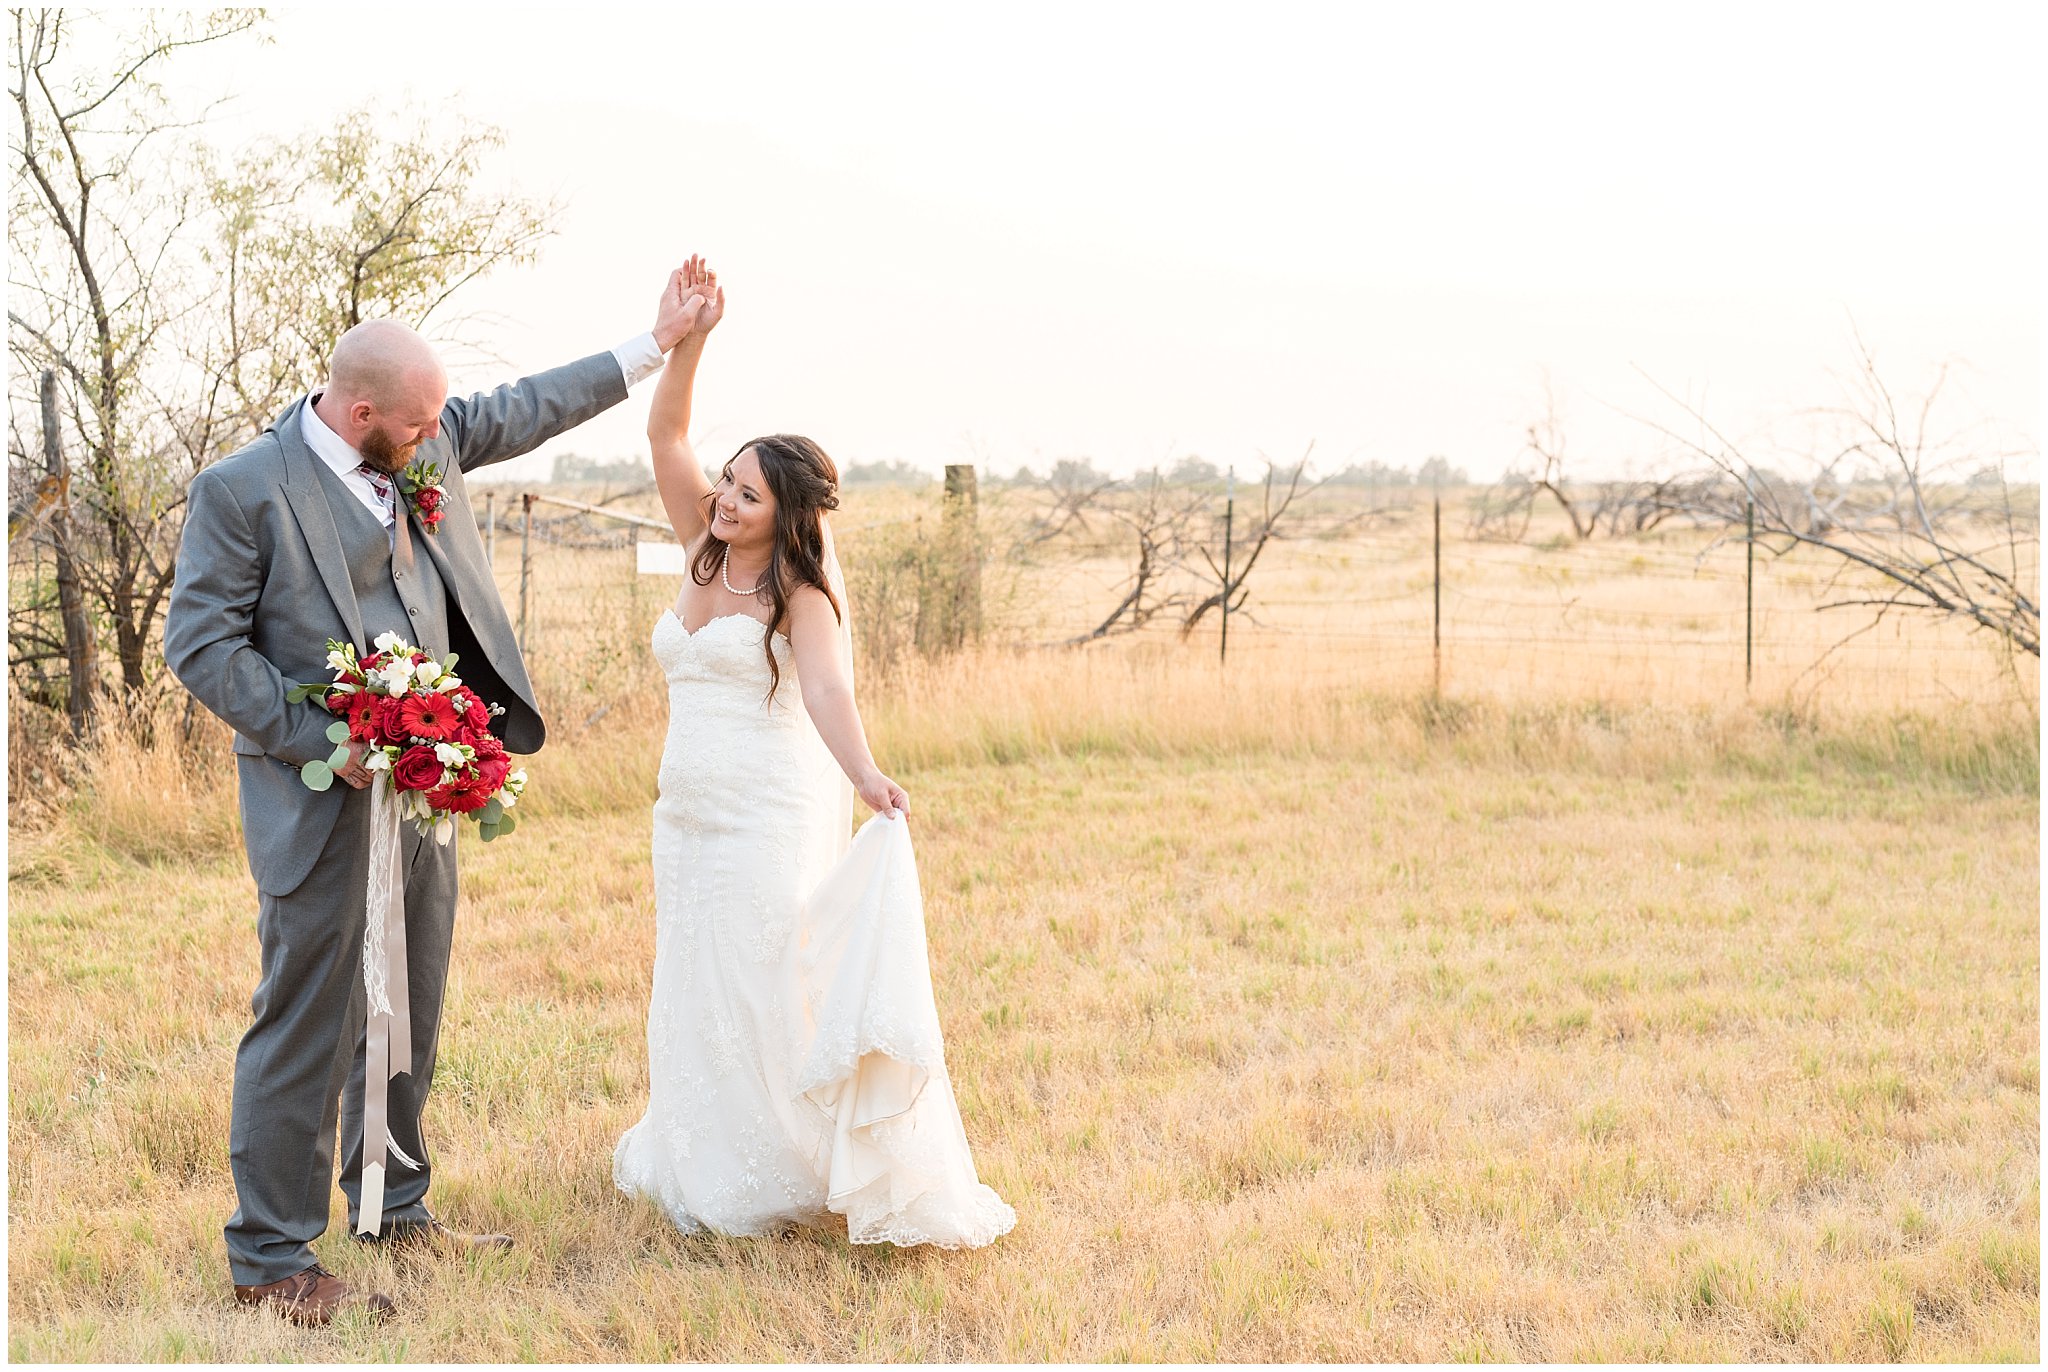 Bride and groom dancing and twirling during sunset portraits | Red and Grey wedding | Davis County Outdoor Wedding | Jessie and Dallin Photography